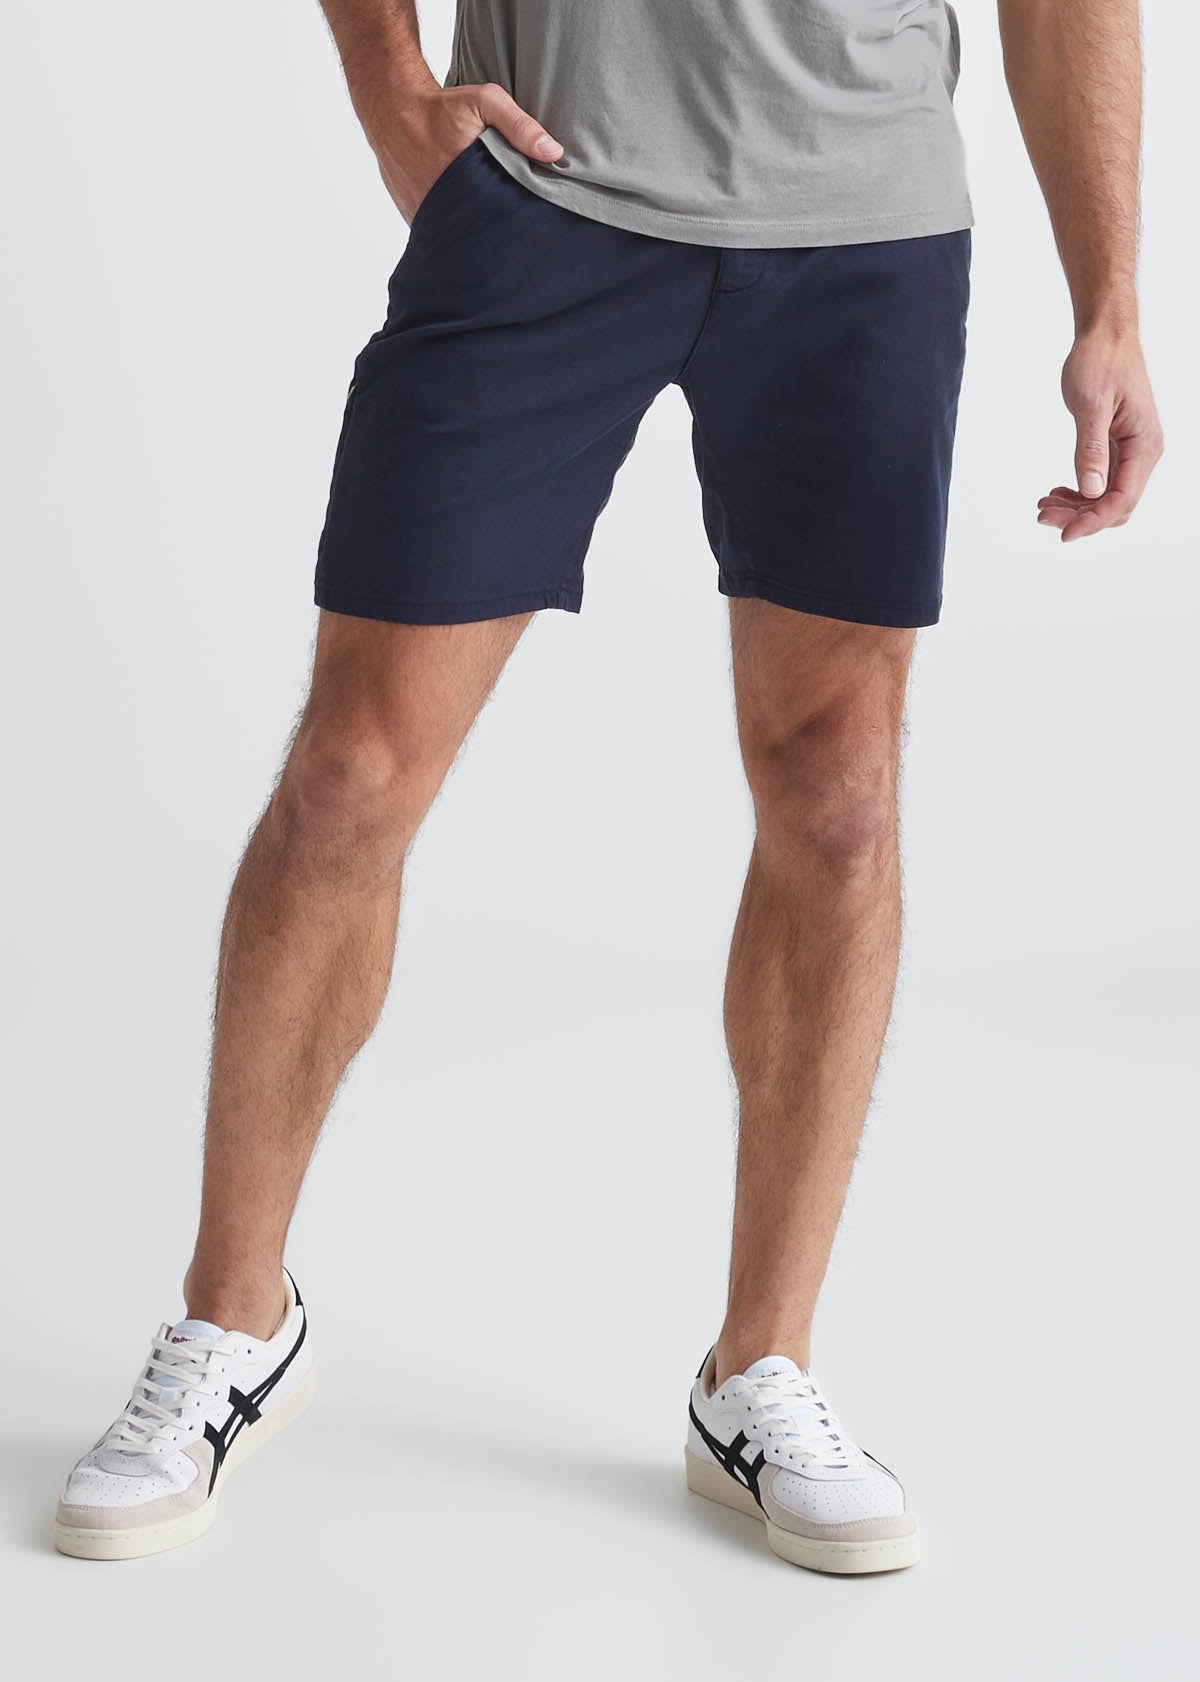 Men's Stretch Shorts - Performance by DUER